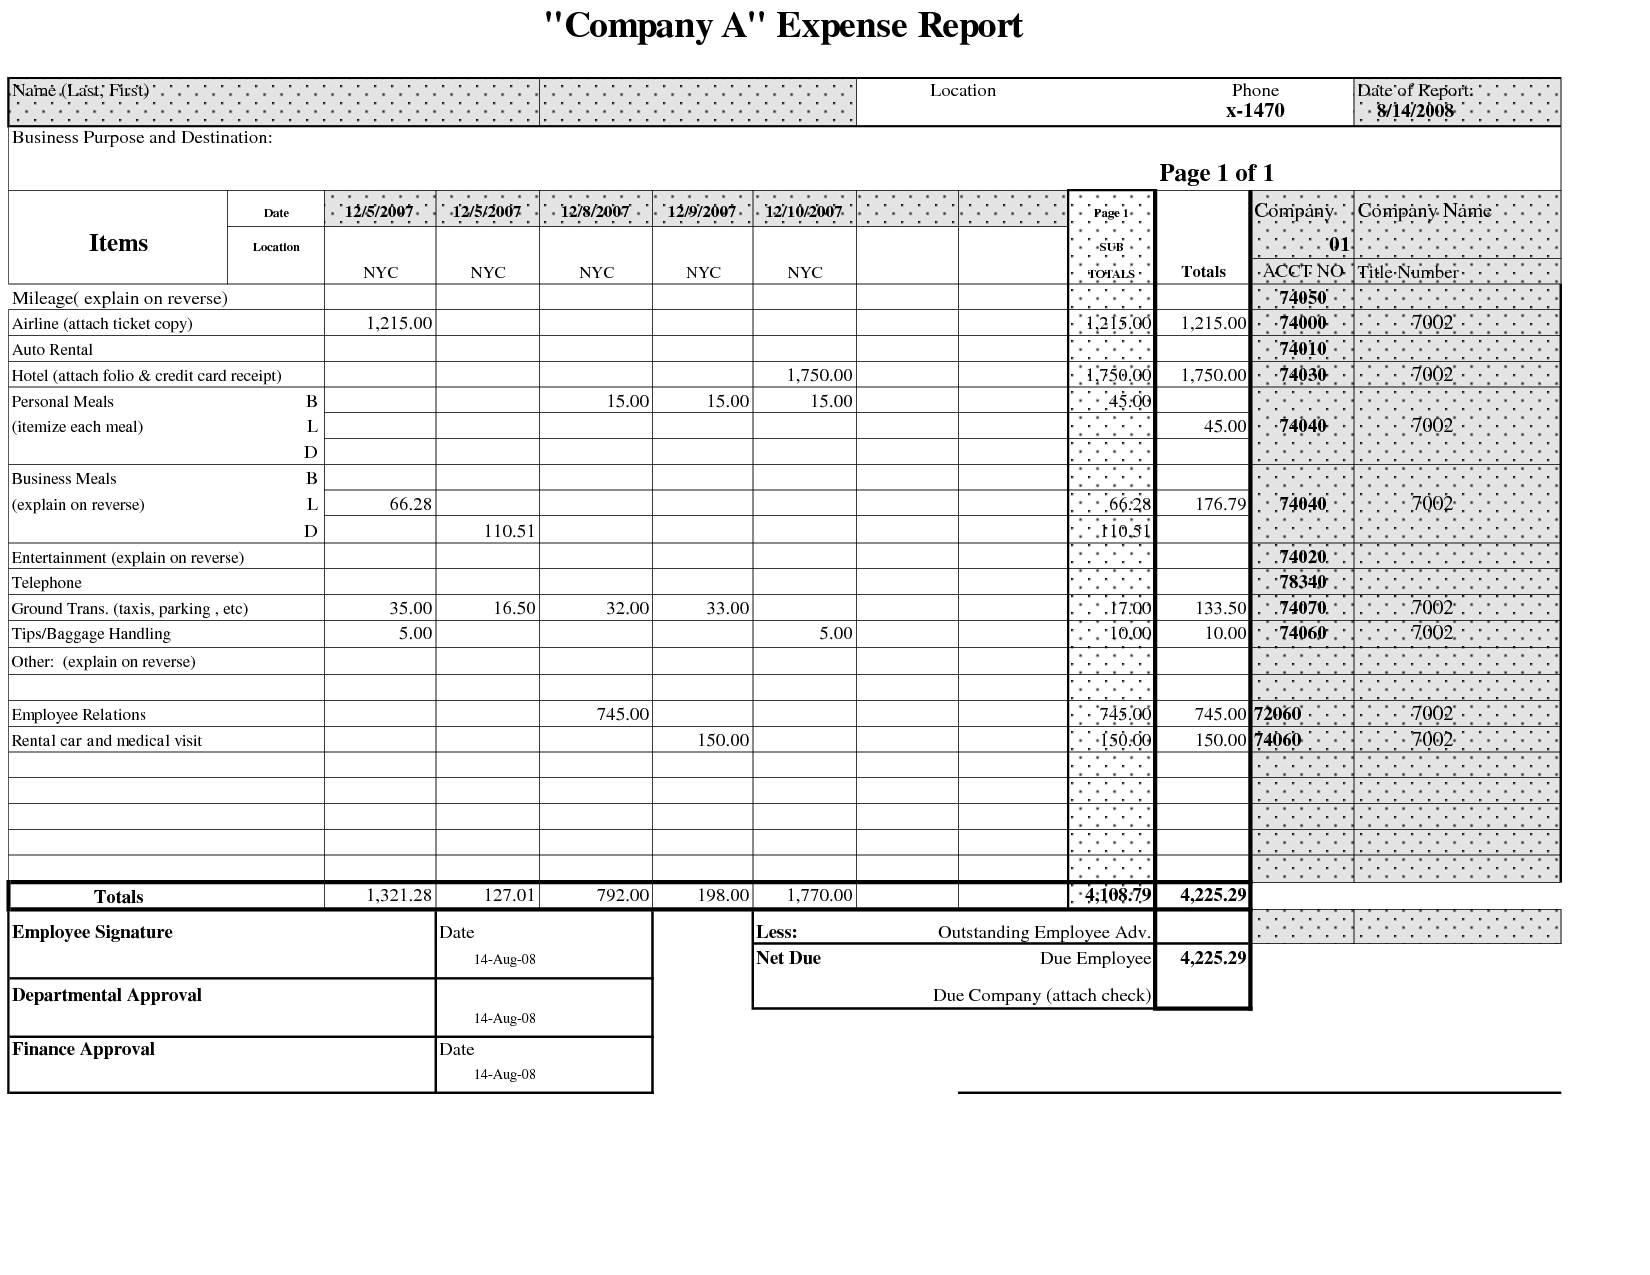 5 New Excel Report Templates | Excel Templates With Company Expense Report Template